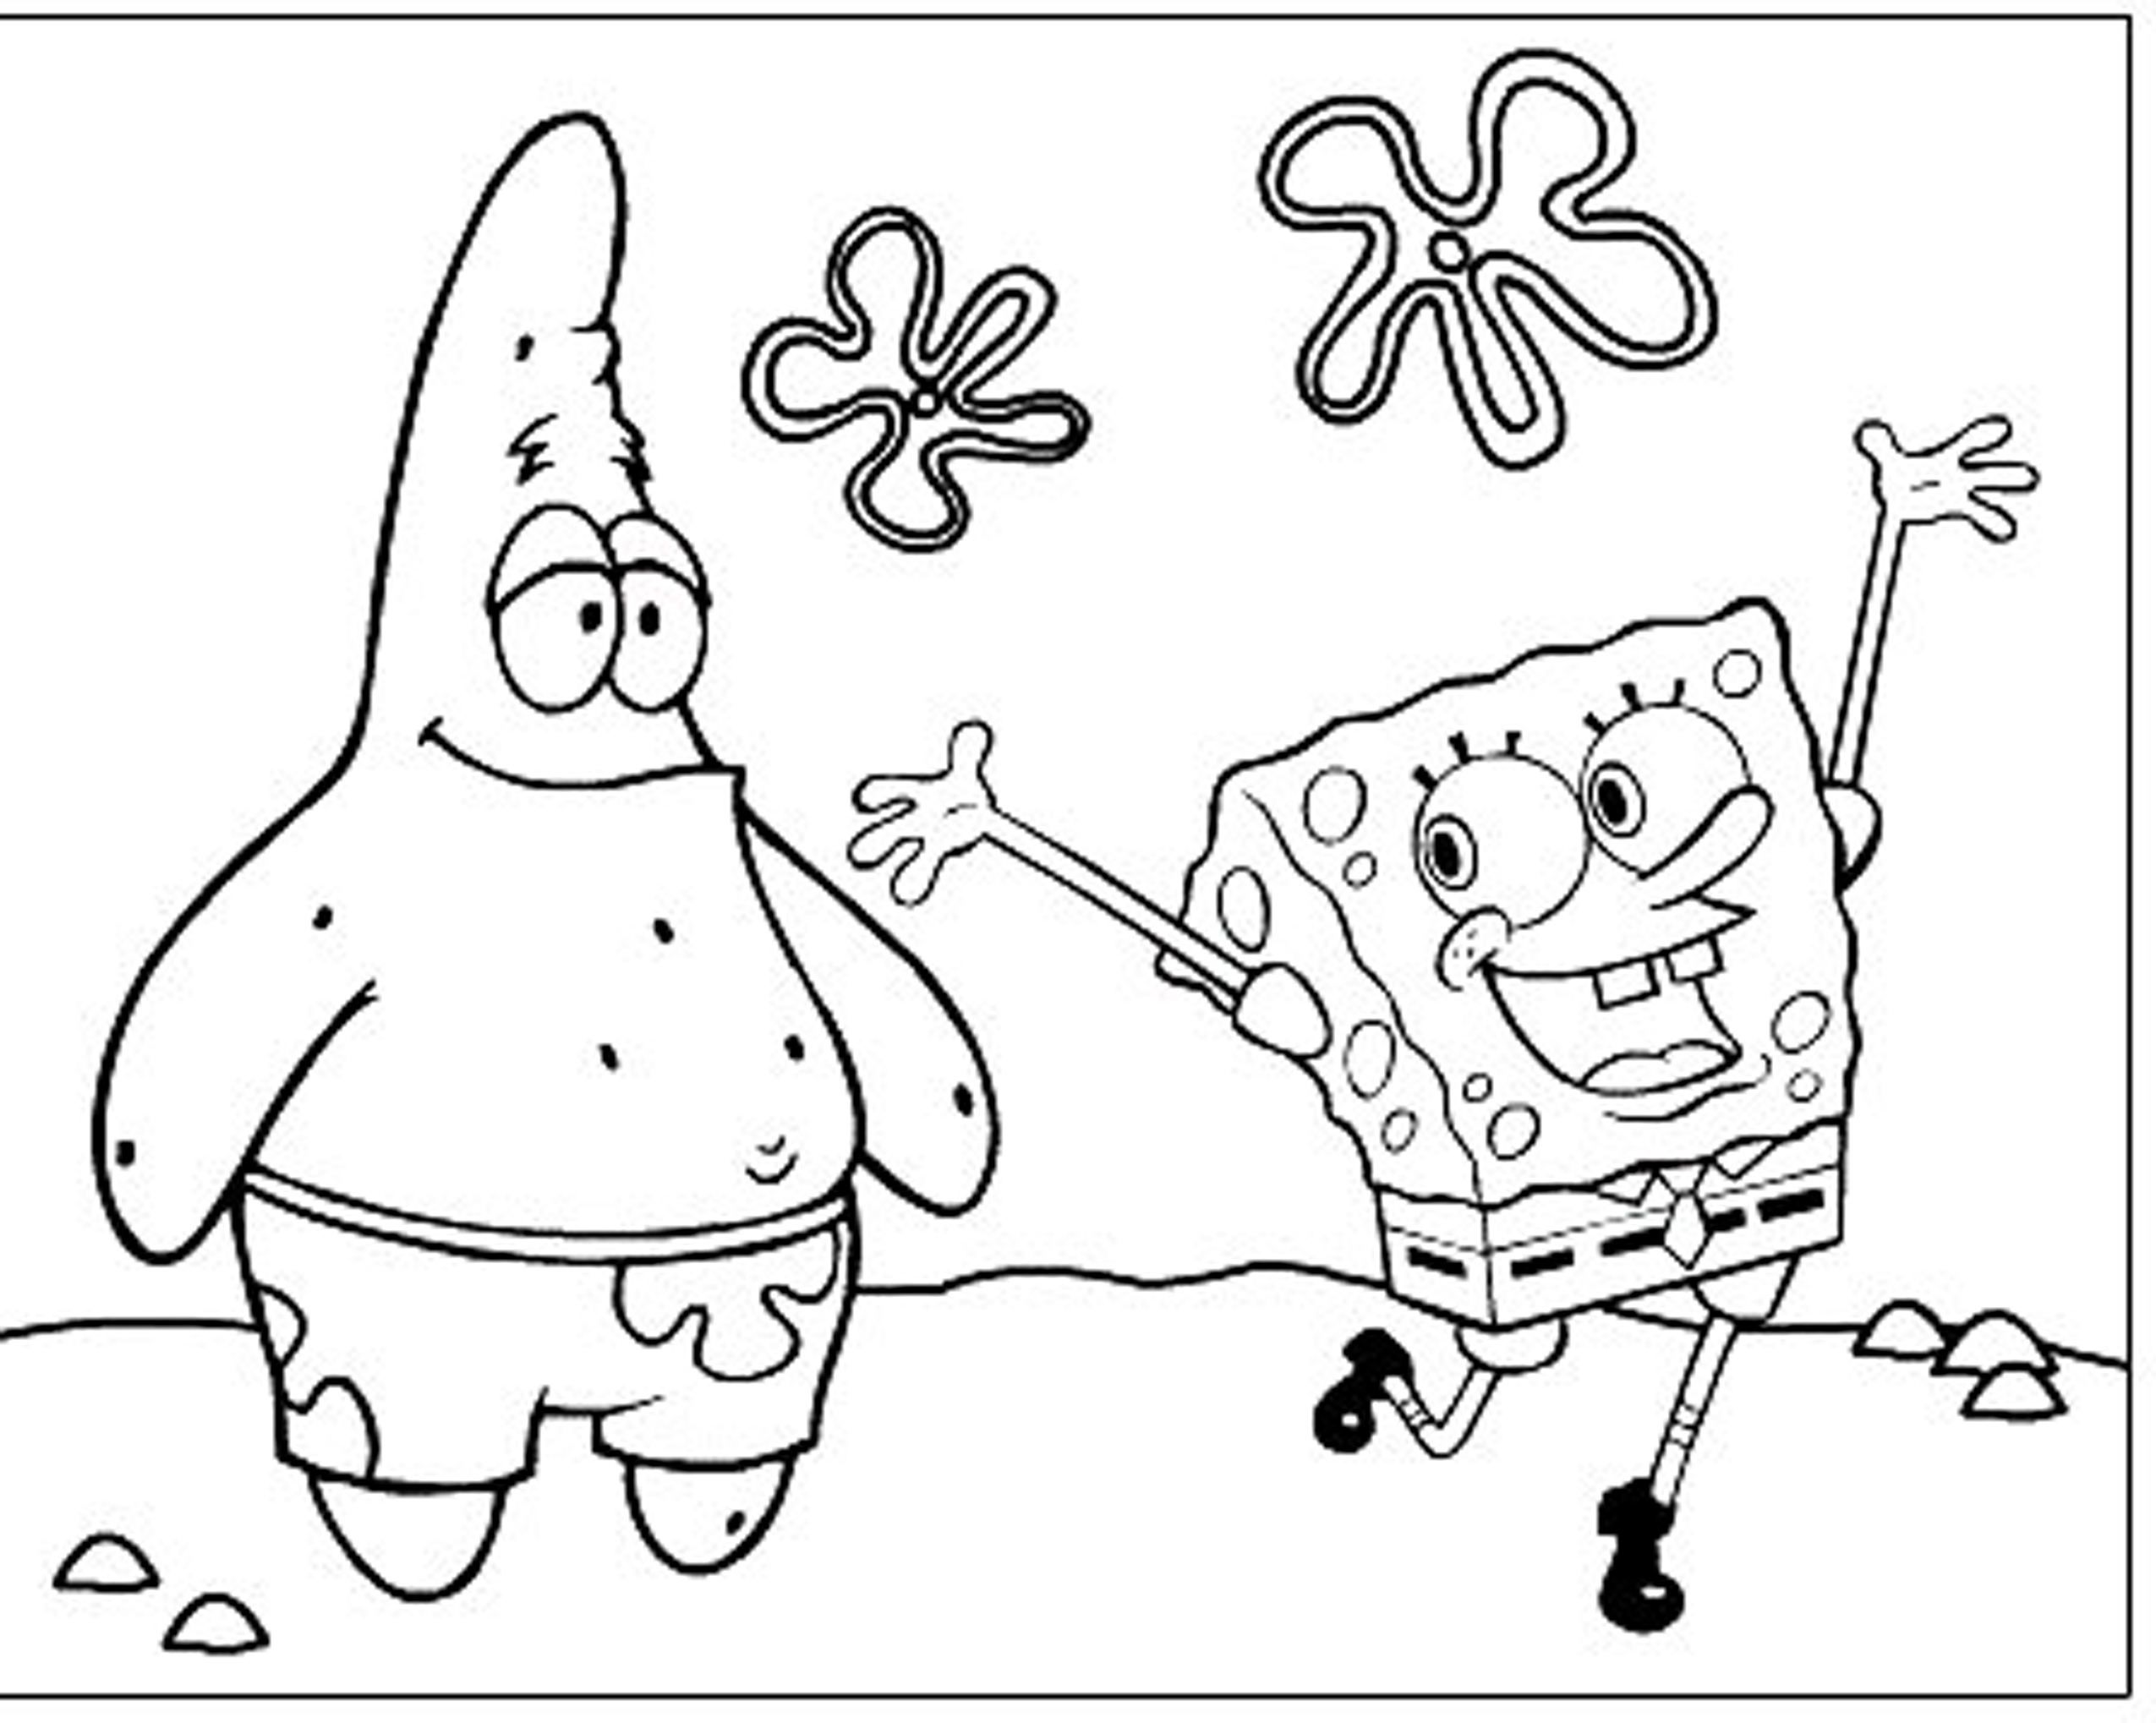 spange-bob-colouring-pages-clip-art-library